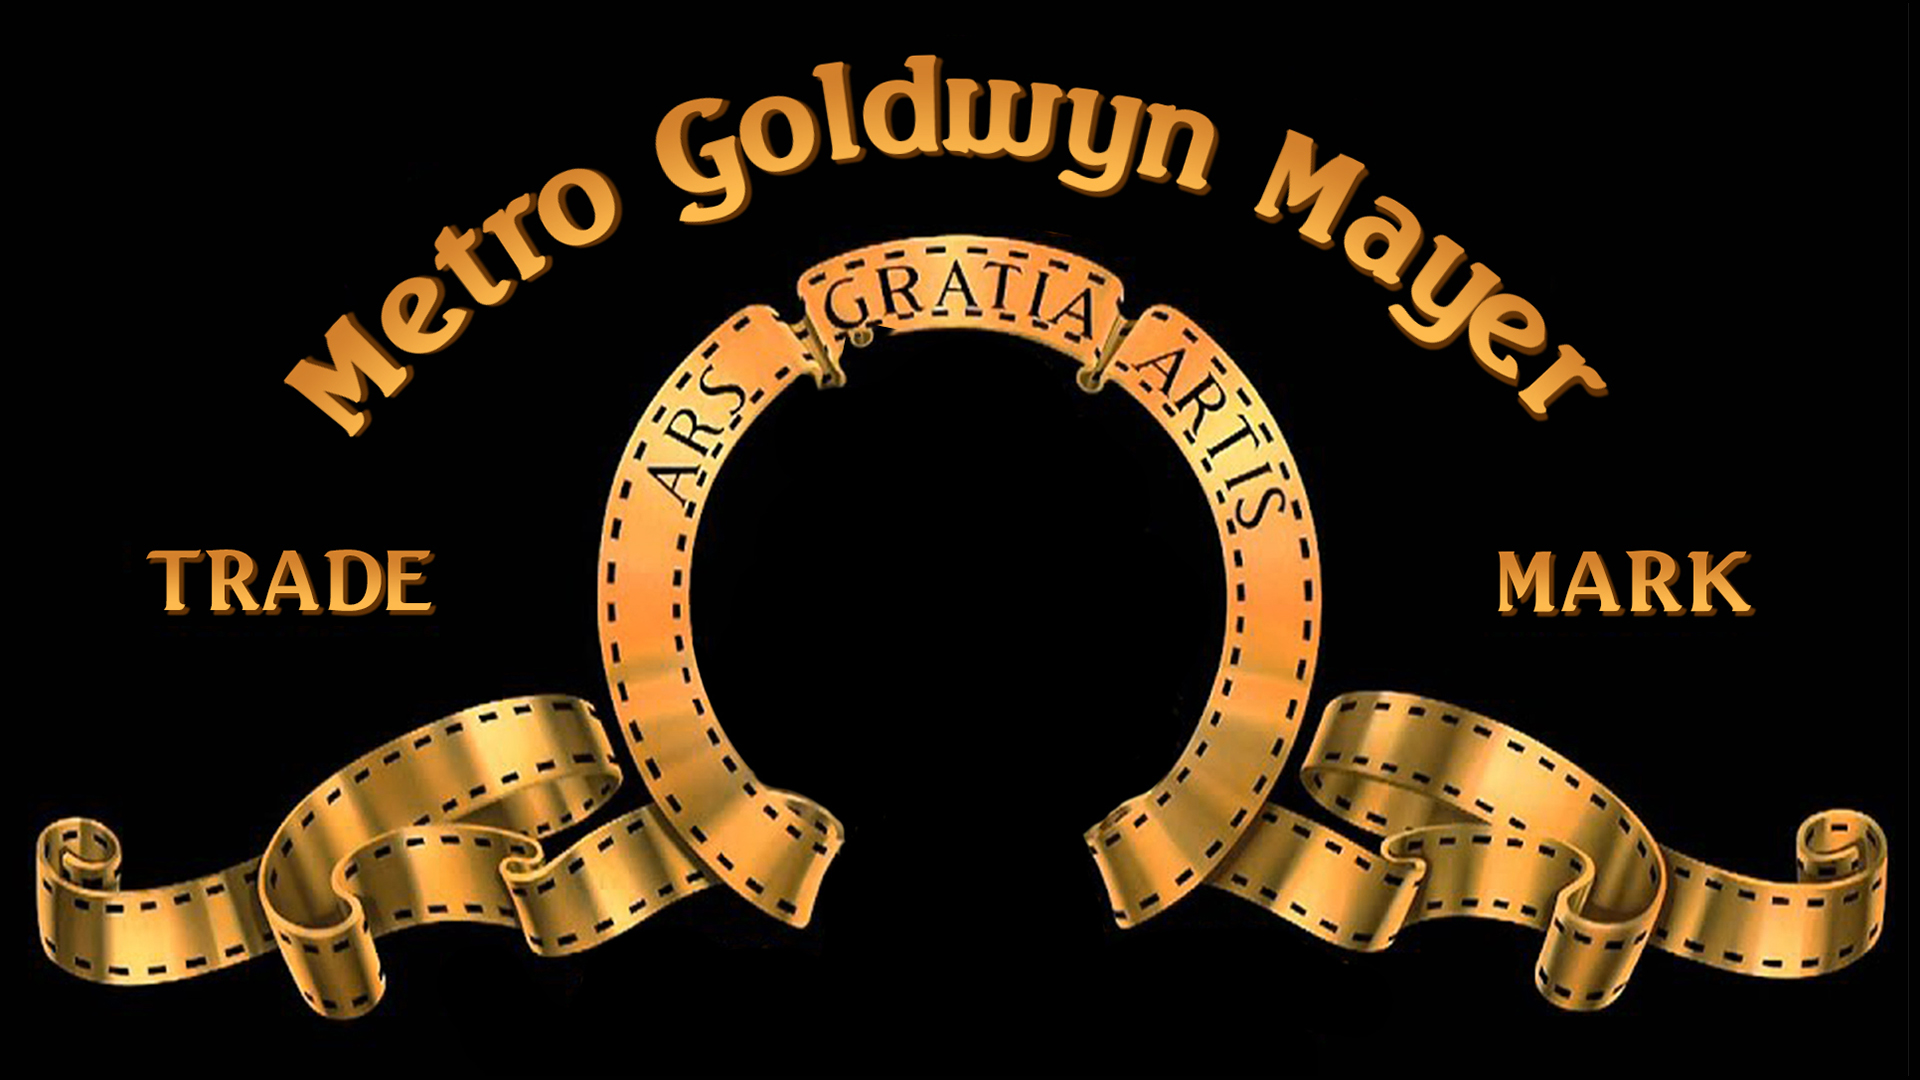 MGM logo. Virtual background to use on Zoom, Microsoft Teams, Skype, Google Meet, WebEx or any other compatible app.